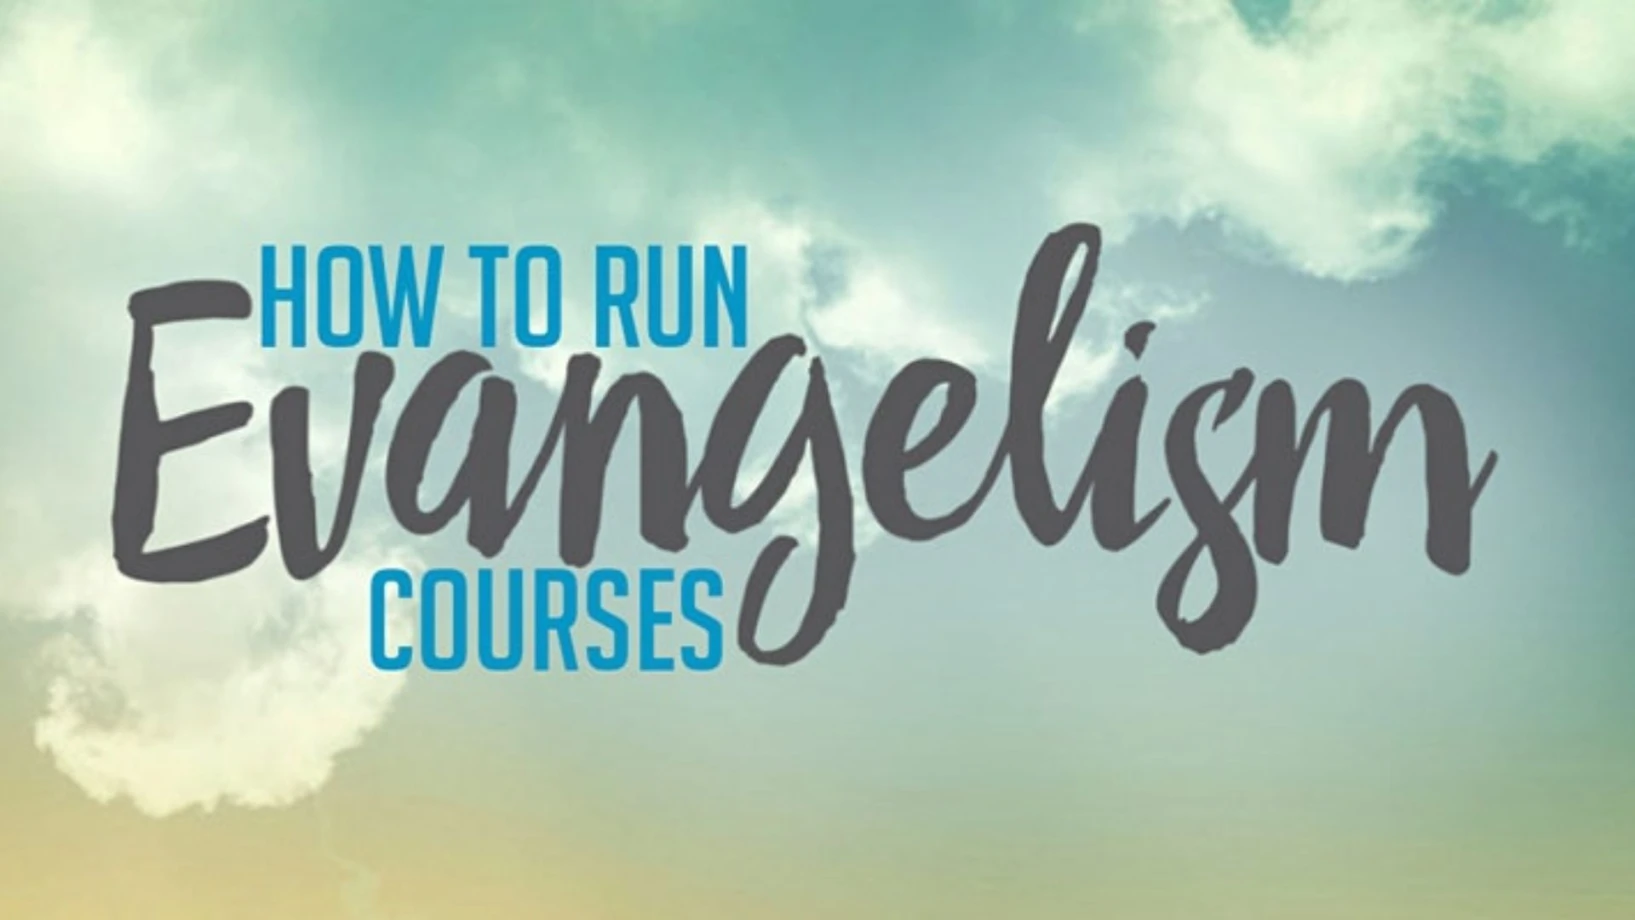 Online training – How to run evangelism courses